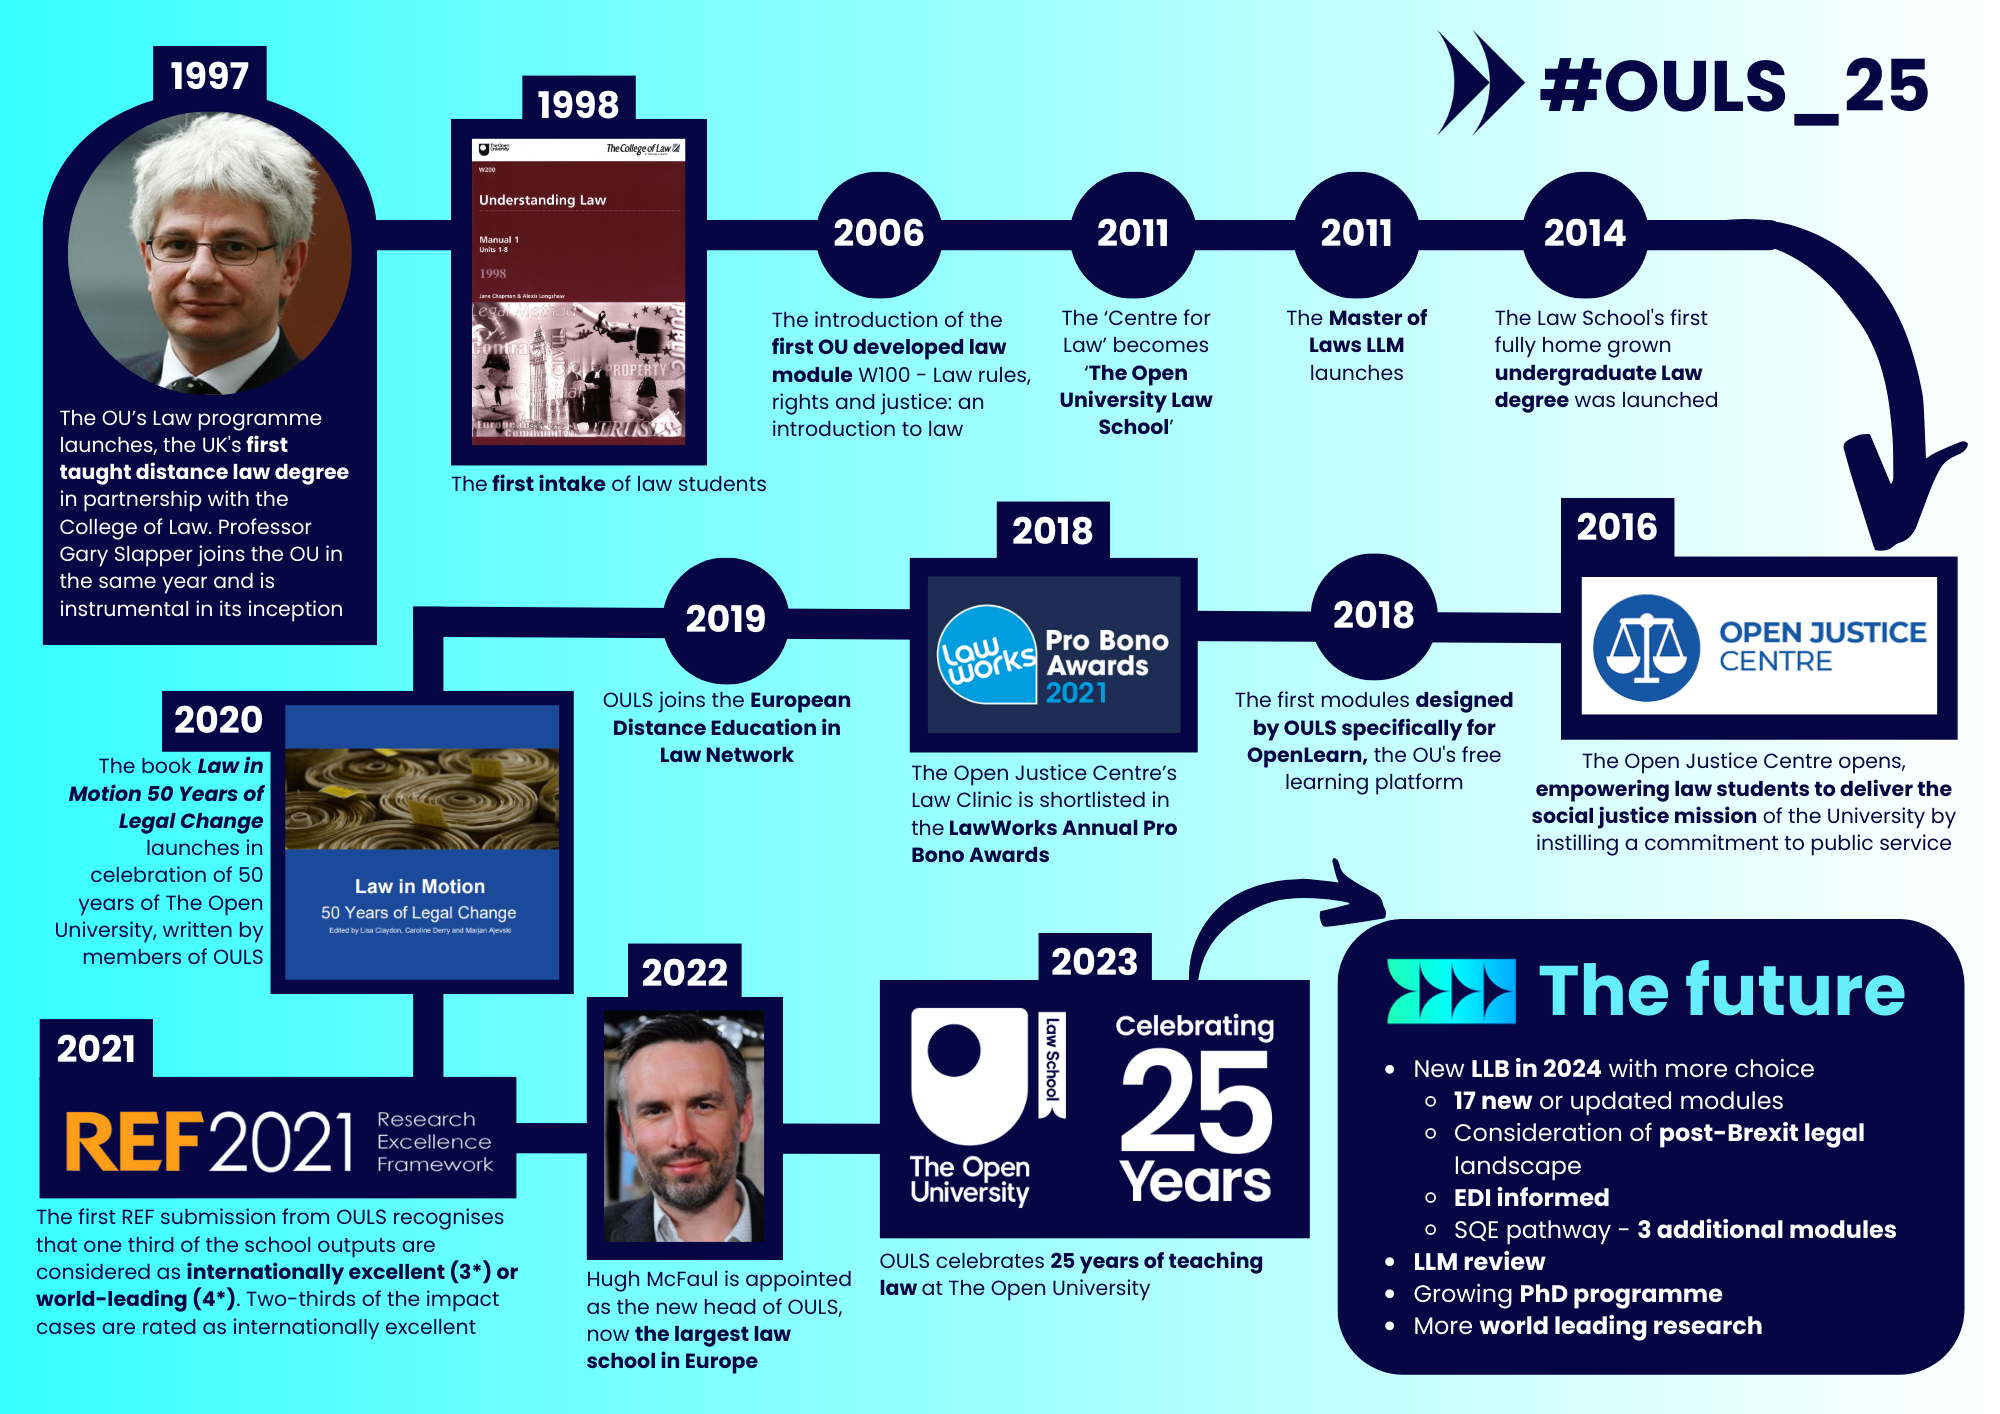 Infographic showing timeline, starting in 1997 The Open University launches the OU's Law programme, which is the UK's first distance taught law degree in partnership with the College of Law. Professor Gary Slapper joins the OU in the same year and is instrumental in its inception. 1998: The first intake of law students begin their OU study. 2006: The introduction of the first OU developed law module W100 - Law rules, rights and justice: an introduction to law. 2011: The 'Centre for Law' becomes 'The Open University Law School'. 2011: The Master of Laws LLM launches. 2014: The Law School's first fully home grown undergraduate Law degree was launched. 2016: The Open Justice Centre opens, empowering law students to deliver the social justice mission of the University by instilling a commitment to public service. 2018: The first modules designed by the OULS specifically for OpenLearn, the OU's free laerning platform. 2018: The Open Justice Centre's Law Clinic is shortlisted in the LawWorks Annual Pro Bono Awards. 2019: OULS joins the European Distance Education in Law Network. 2020: The book 'Law in Motion 50 Years of Legal Change' launches in celebration of 50 years of The Open University, written by members of OULS. 2021: The first REF submission from OULS recognises that one one third of the school outputs are considered as internationally excellent (3 star rating) or world-leading (4 star rating). Two-thirds of the impact cases are rated as internationally excellent. 2022: Hugh McFaul is appointed as the new head of OULS, now the largest law school in Europe. 2023: OULS celebrates 25 years of teaching law at The Open University. Finally the infographic concludes with 'The future' with the following bullet point list: New LLB in 2004 with more choice, 17 new or updated modules, Consideration of post-Brexit legal landscape, EDI informed, SQE pathway - 3 additional modules. LLM review, growing PhD programme, and more world leading research. With the Twitter hashtag #OULS_25 at the top right hand corner.